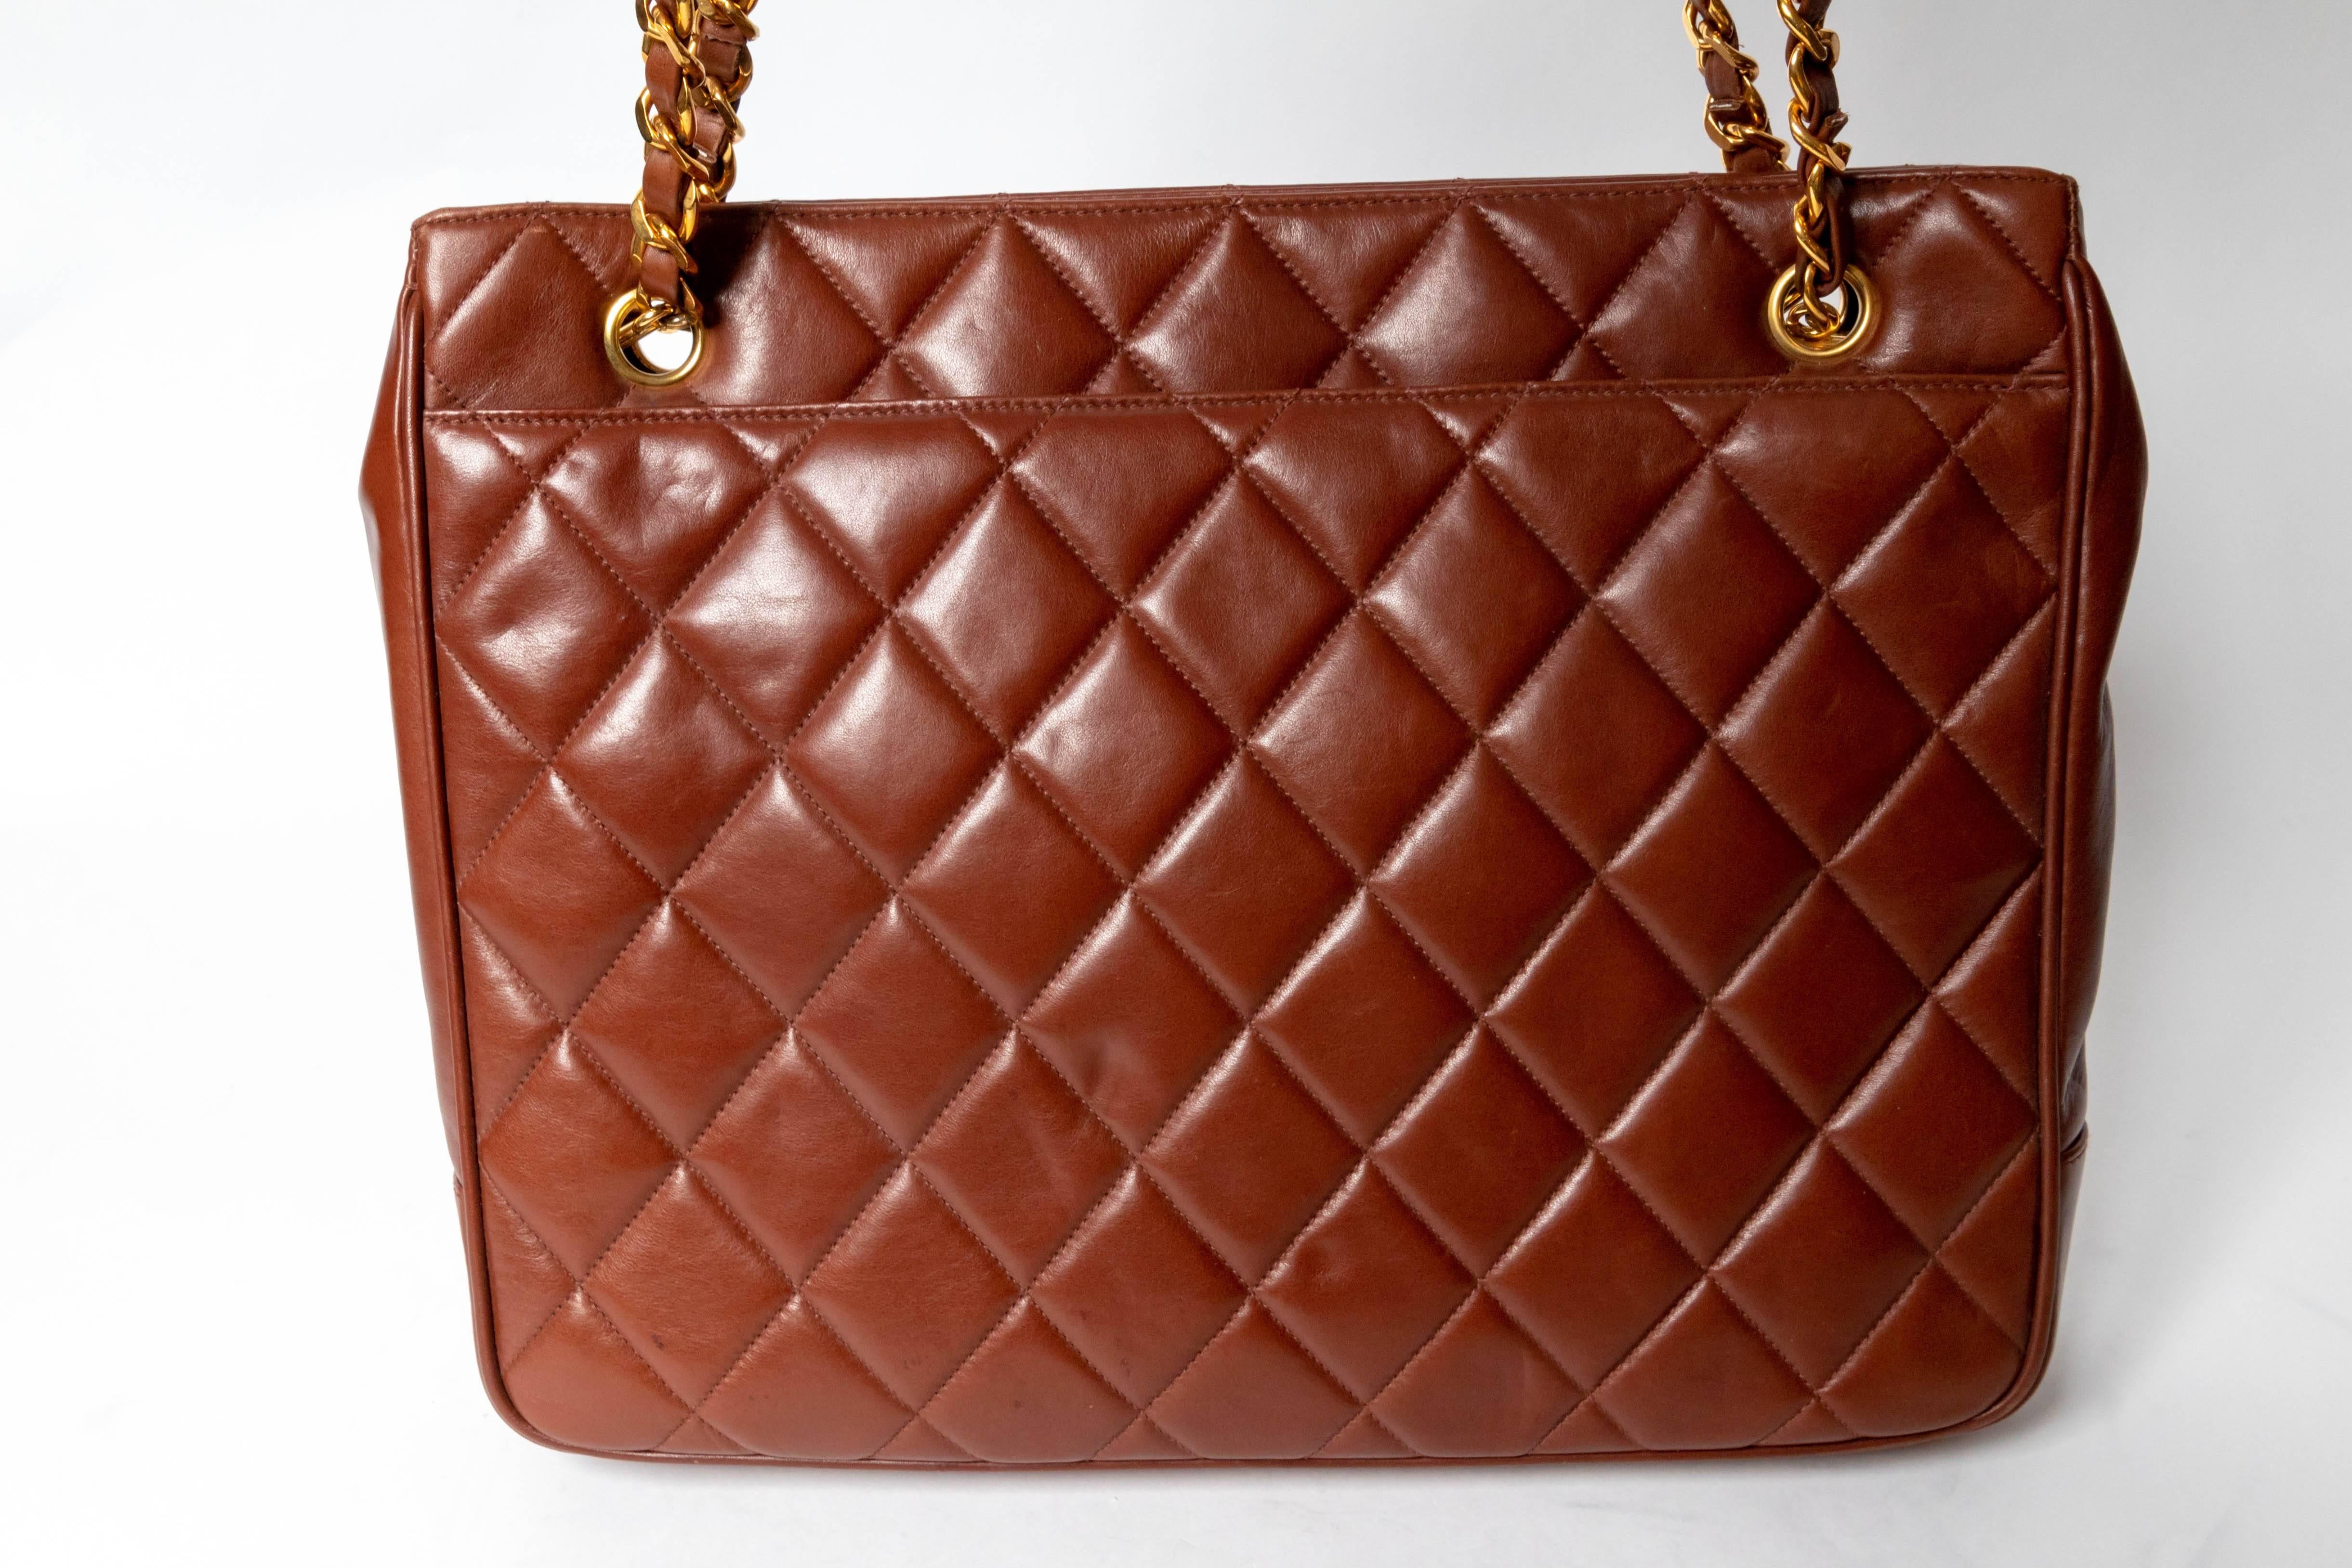 This Incredibly Chic Brown Lambskin Chanel Shoulder Bag has its original tickets still attached. 
Made between 1994 - 1996, the bag is in excellent condition.
Adorned with Chanel's iconic bead ball, this bag has exterior flap pockets and a snap